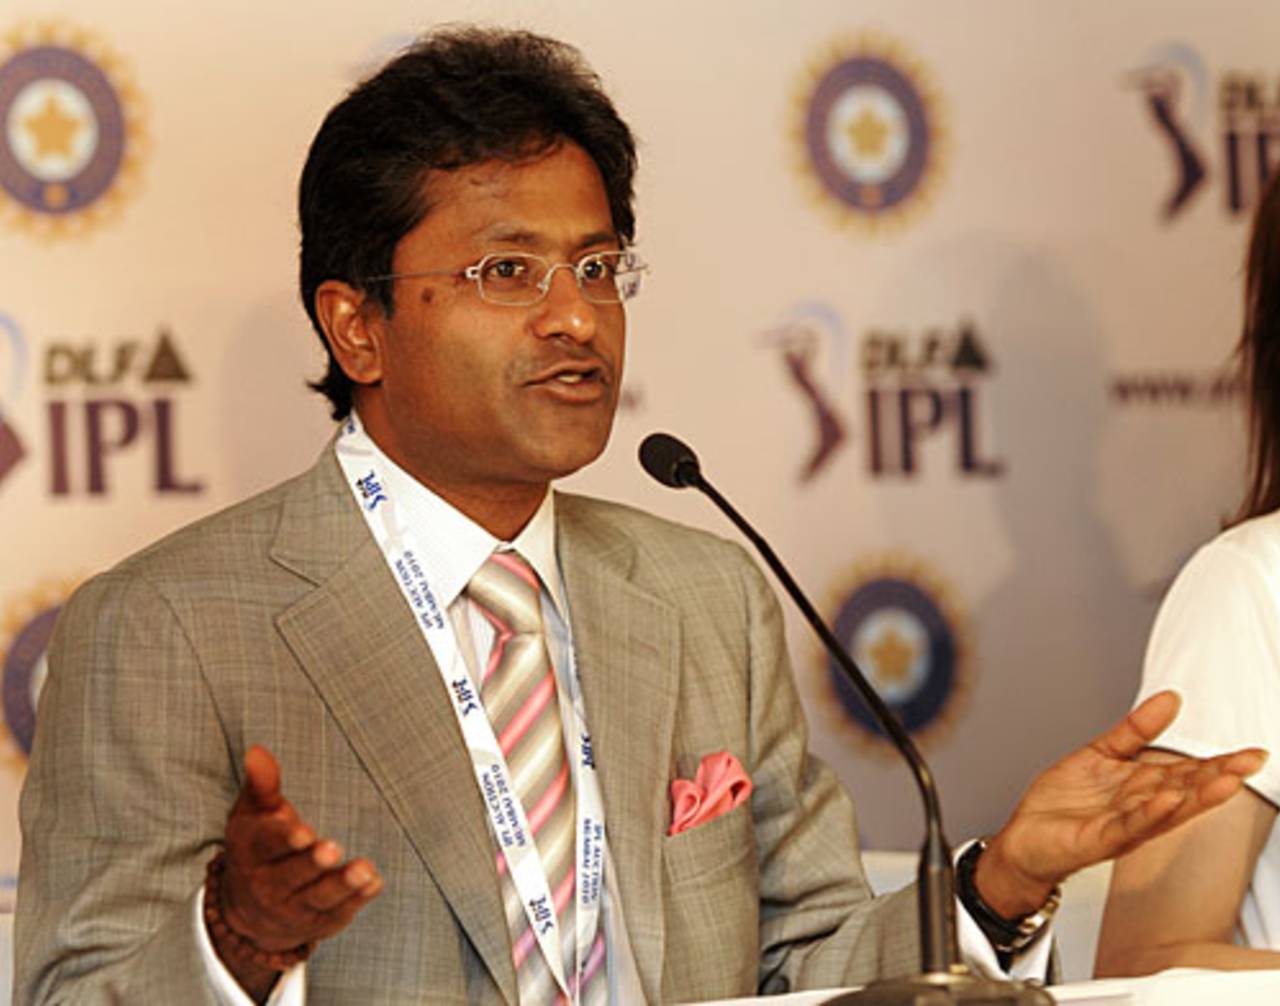 Lalit Modi takes questions from reporters after the IPL auction, Mumbai, January 19, 2010